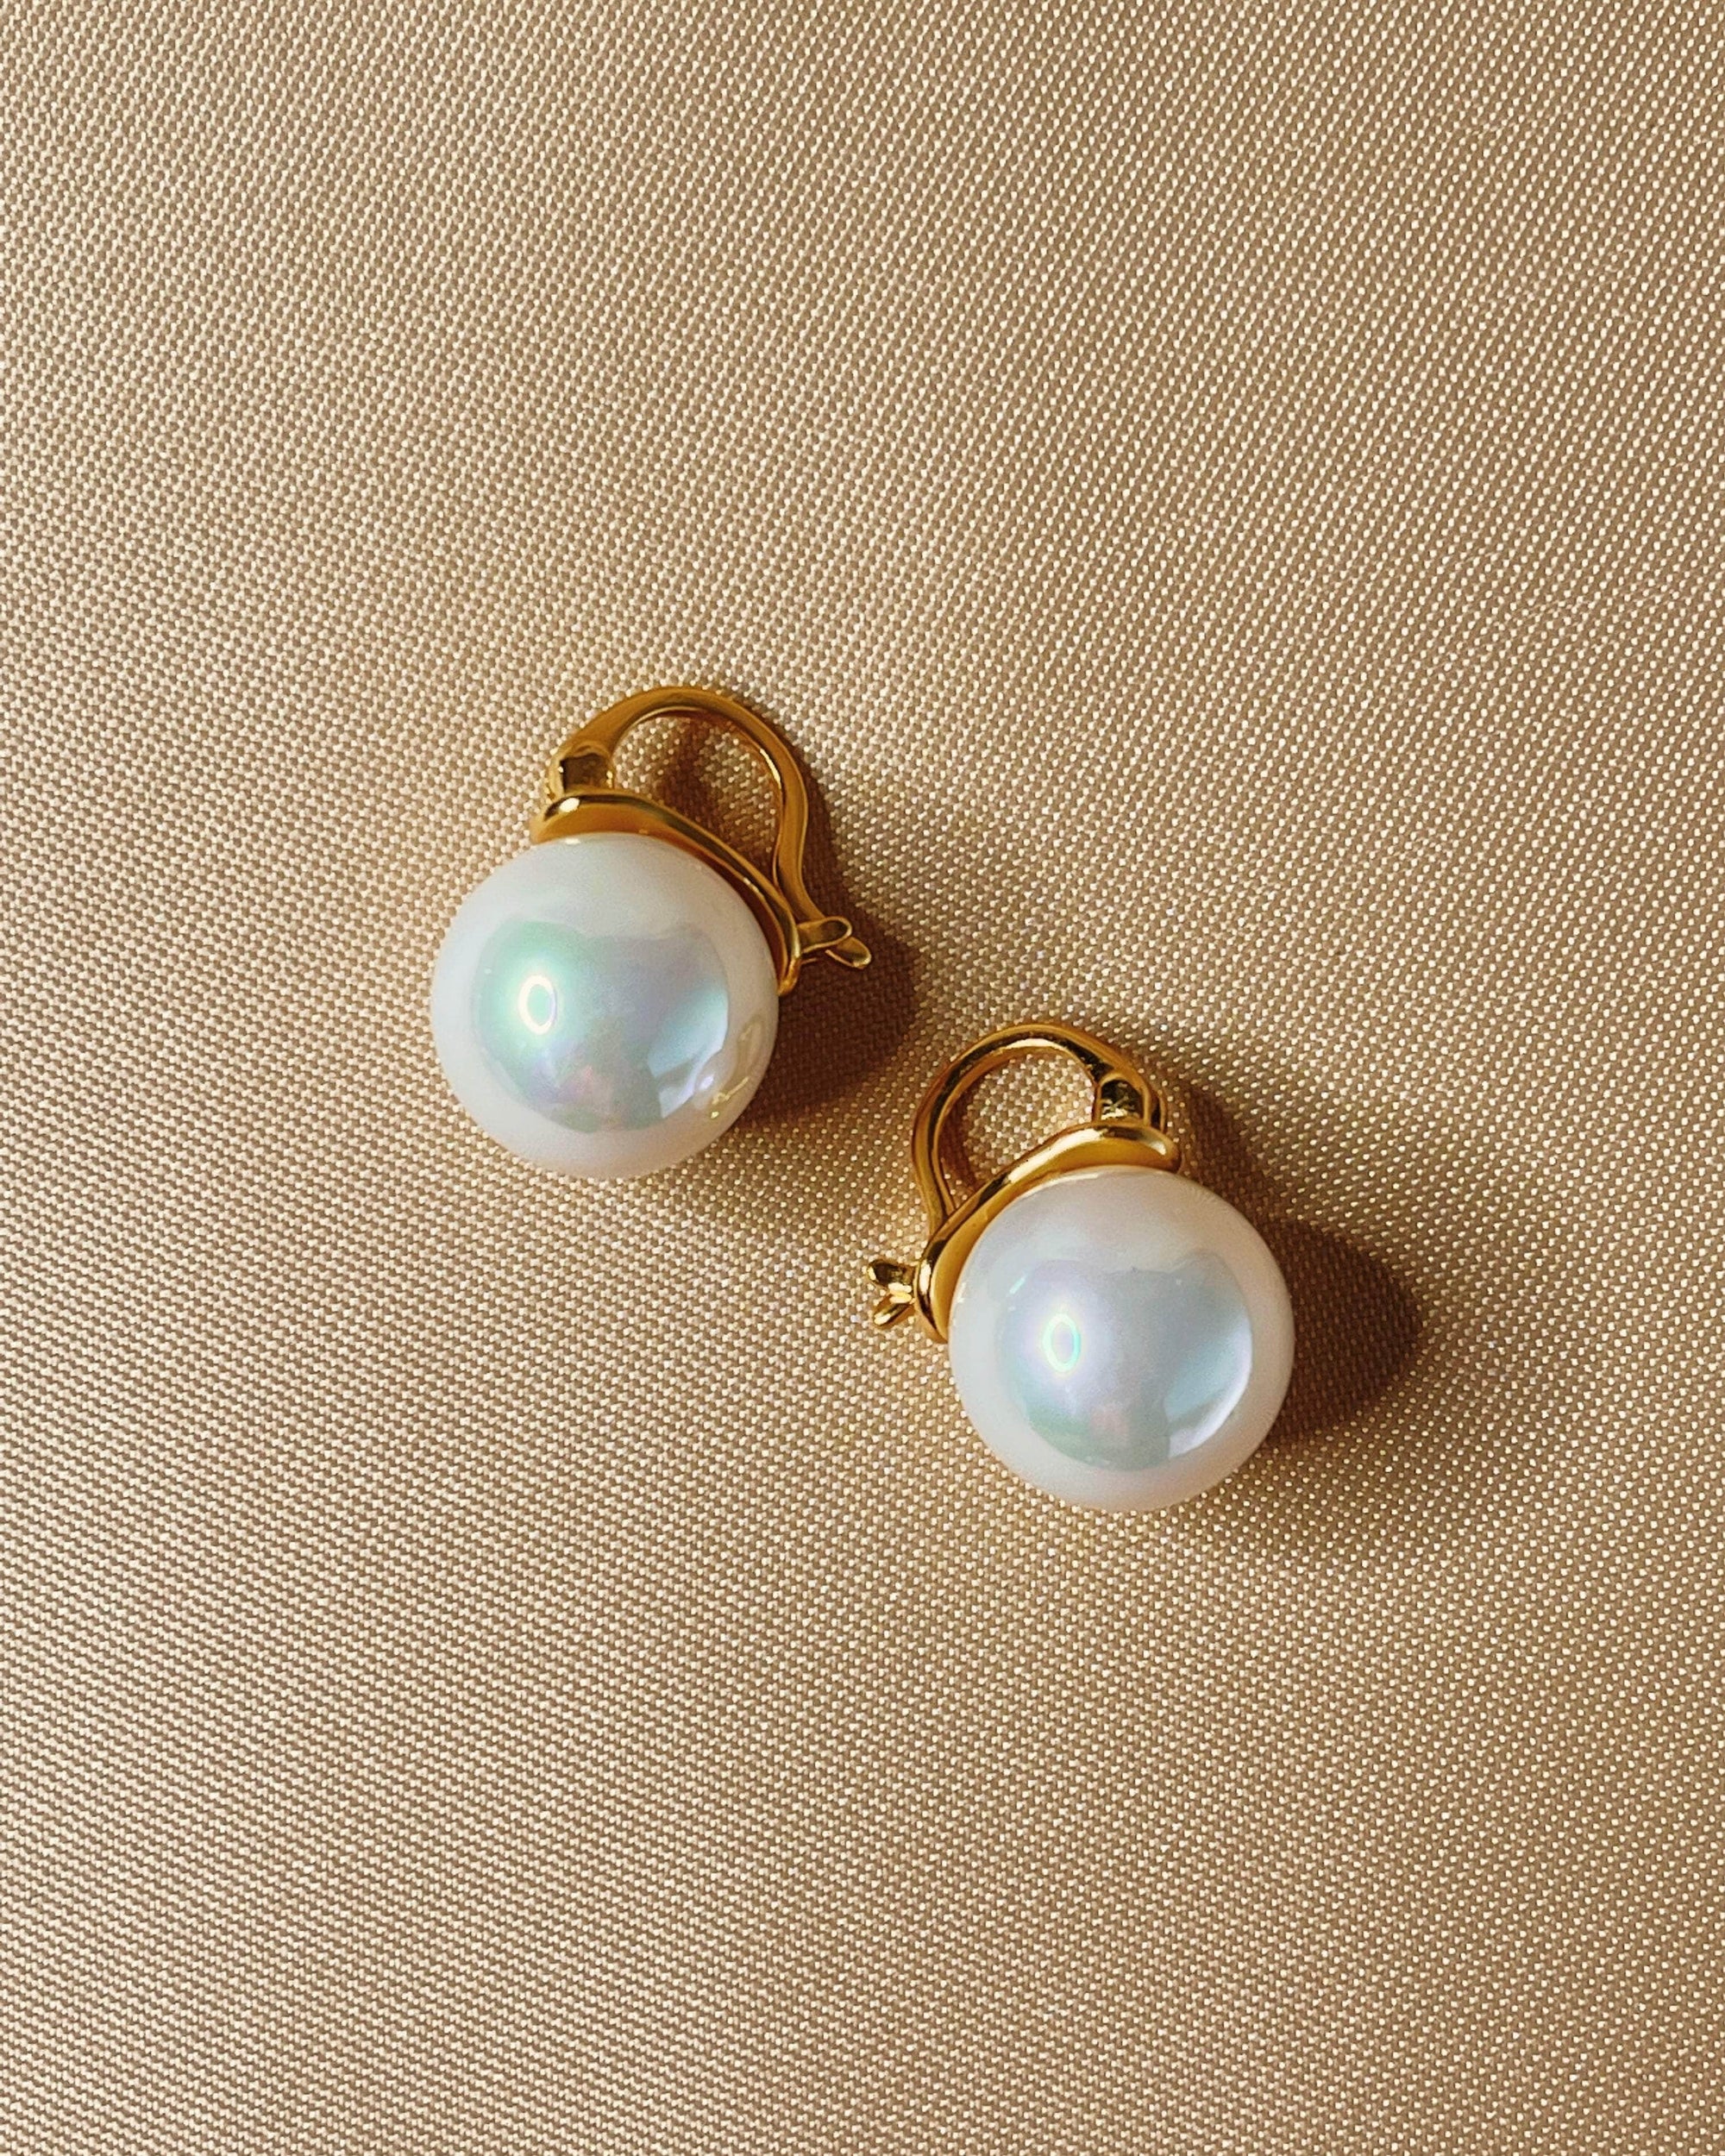 So Dainty Co. Huggies / Hoops Georgia Pearl Gold Earrings Gold Plated 925 Sterling Silver Jewelry